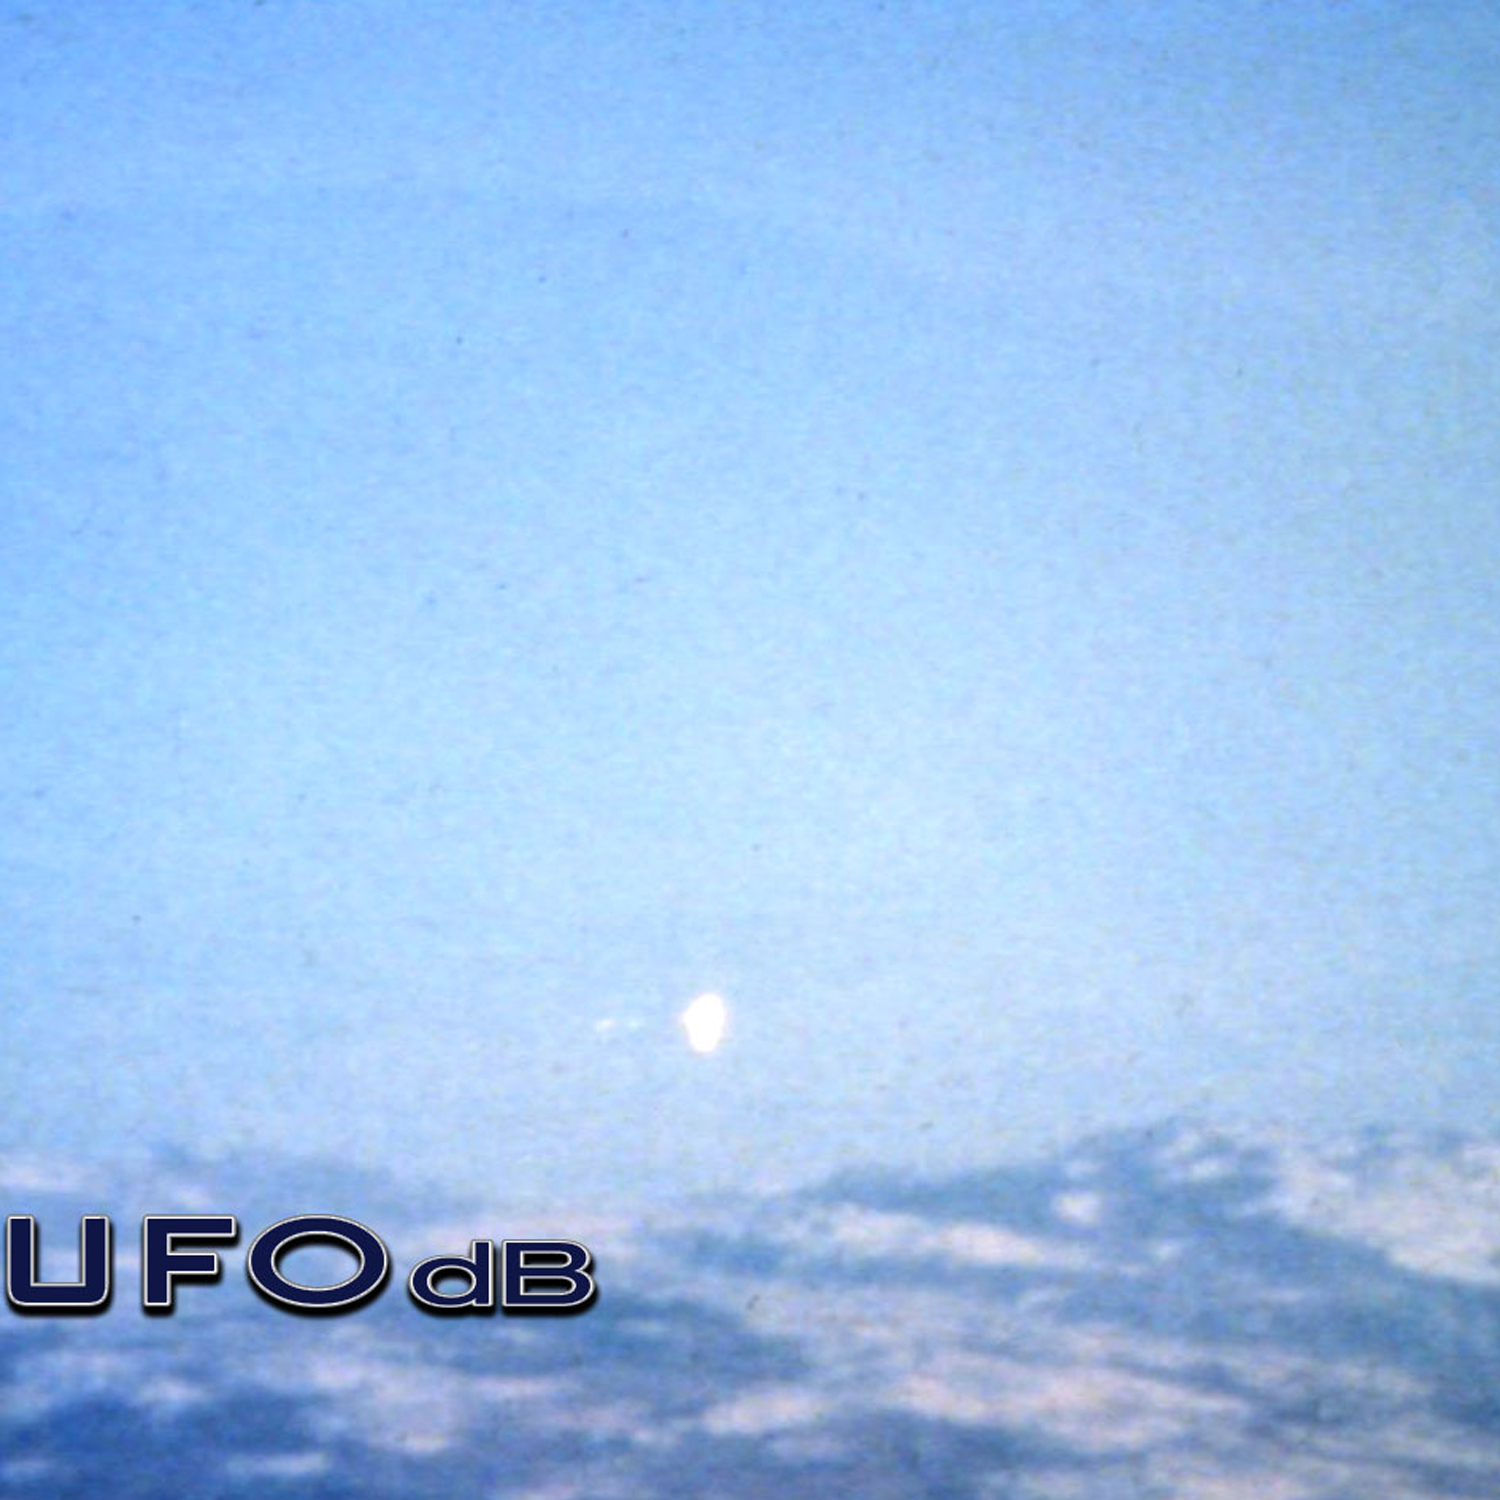 UFO picture taken over the 15 km long Hessdalen valley. Holtalen UFO Picture #17-2